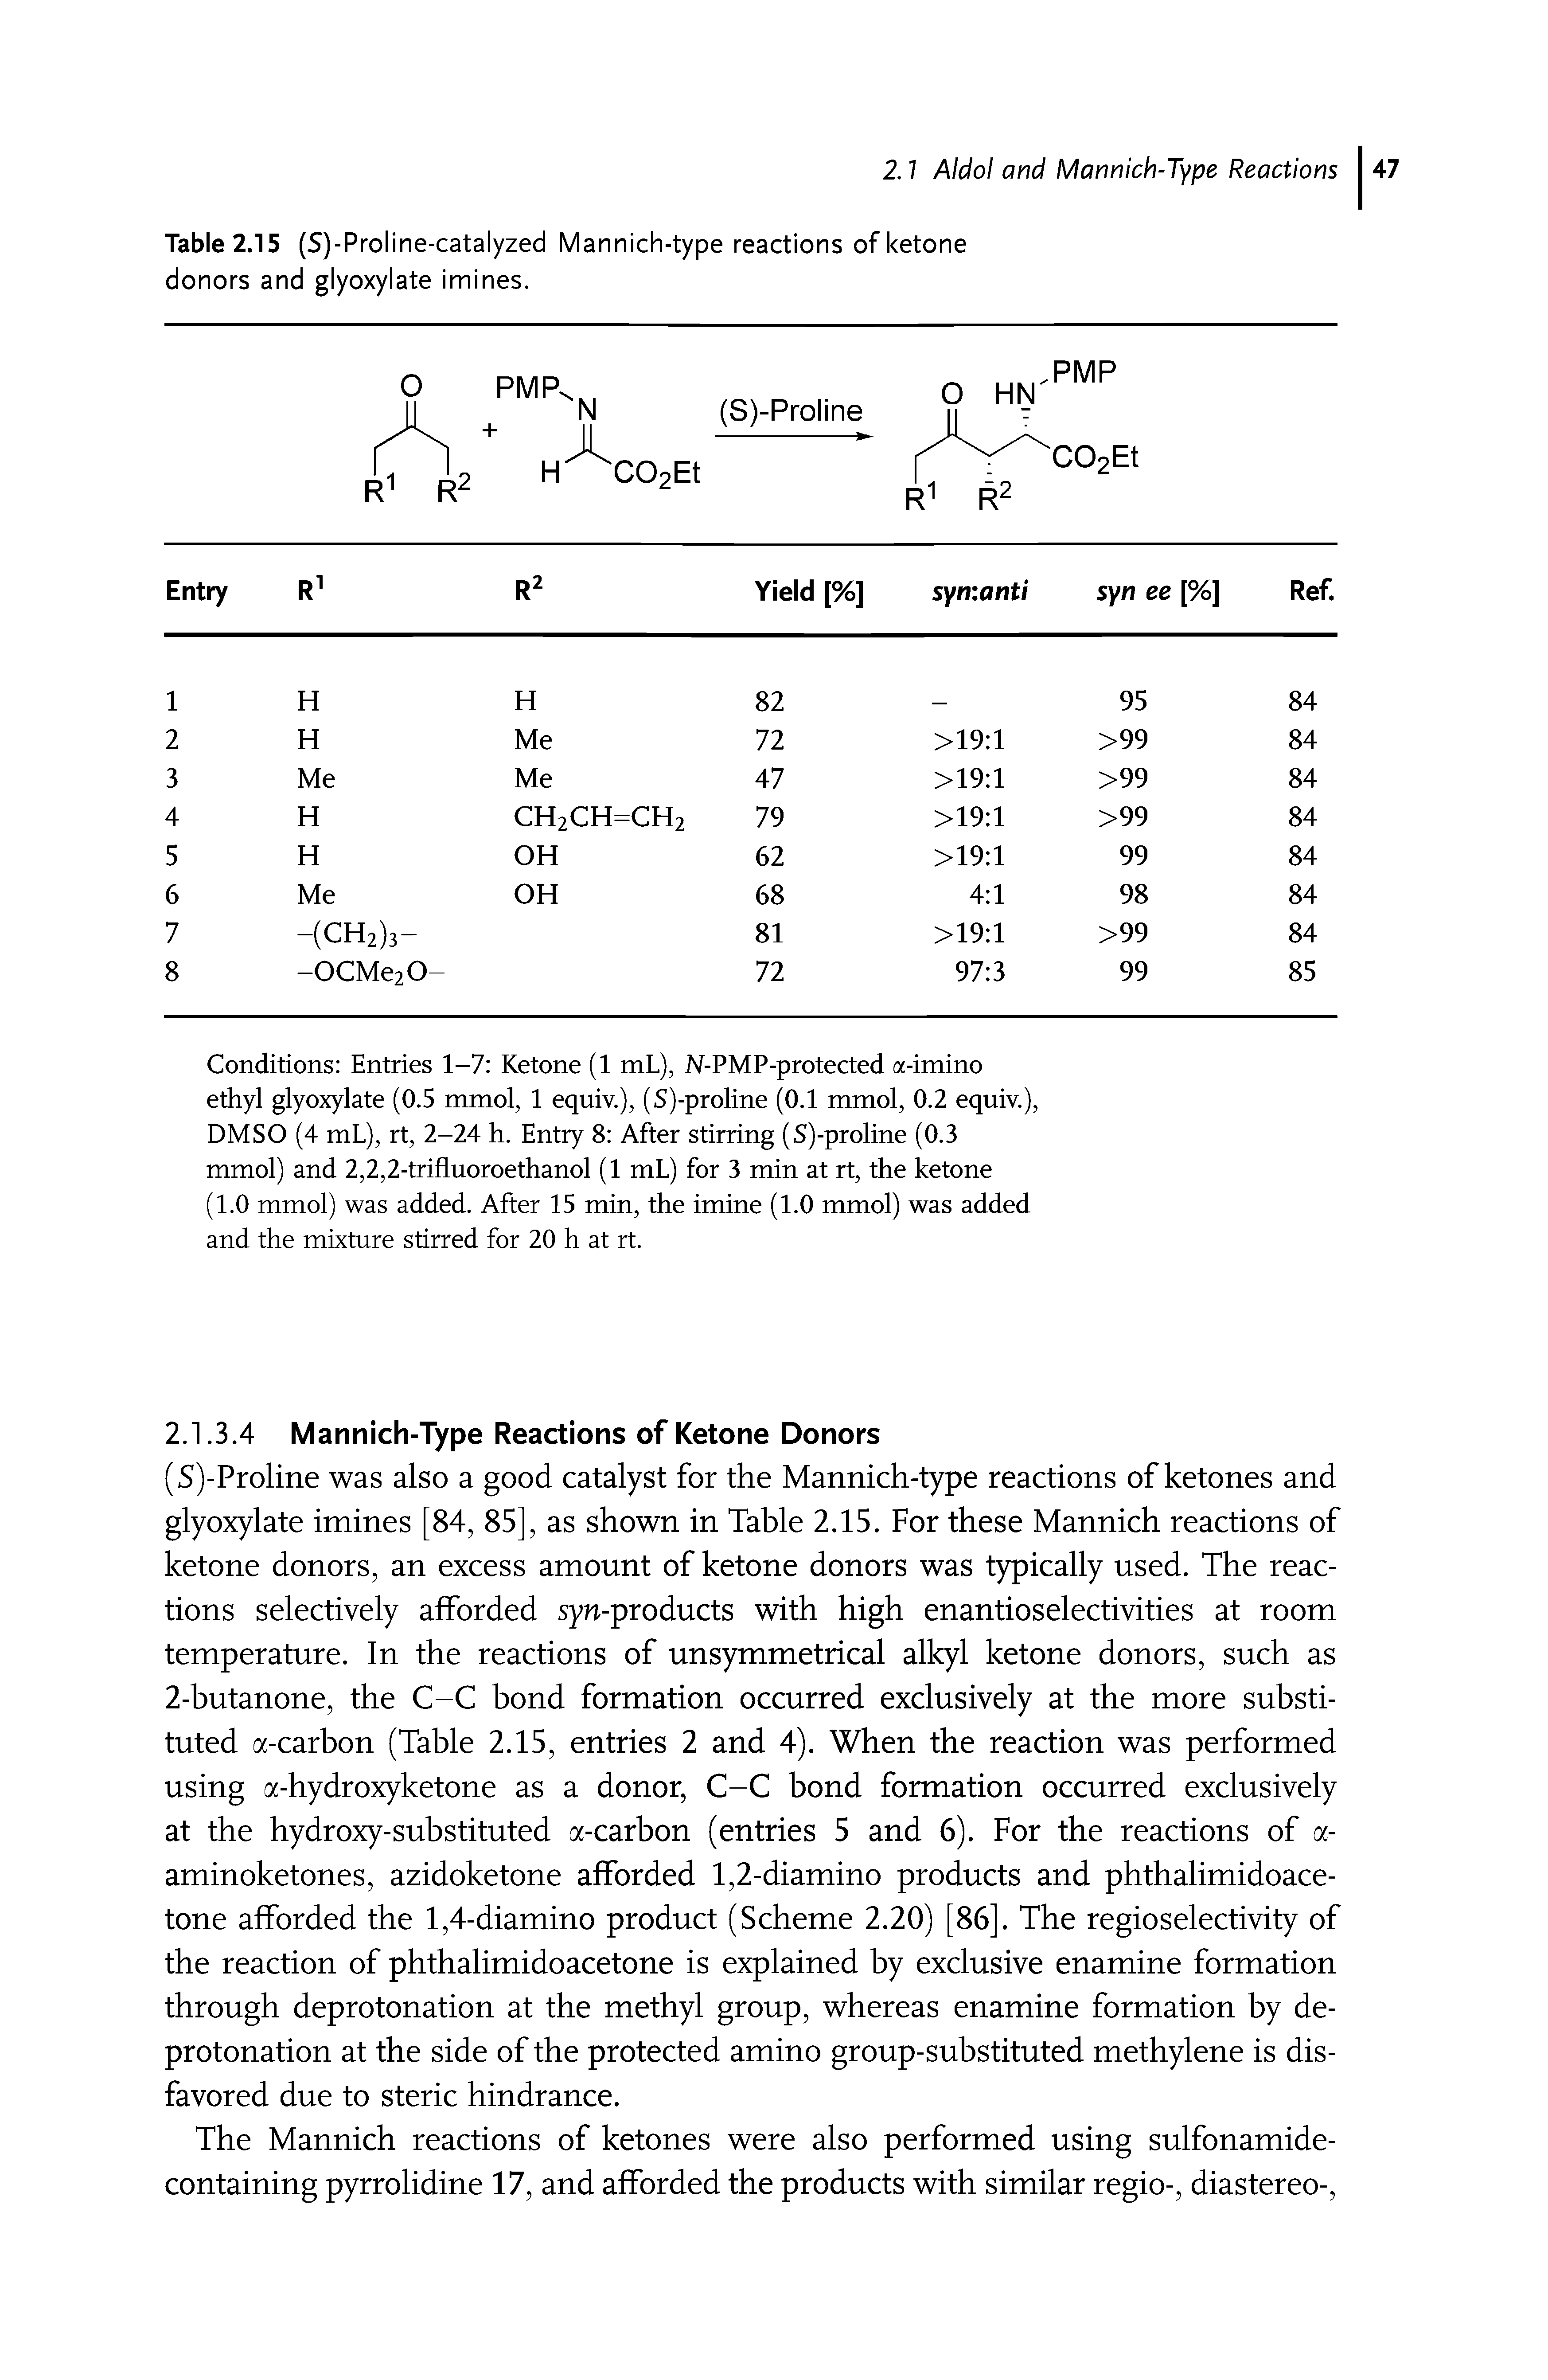 Table 2.15 (S)-Proline-catalyzed Mannich-type reactions of ketone donors and glyoxylate imines.